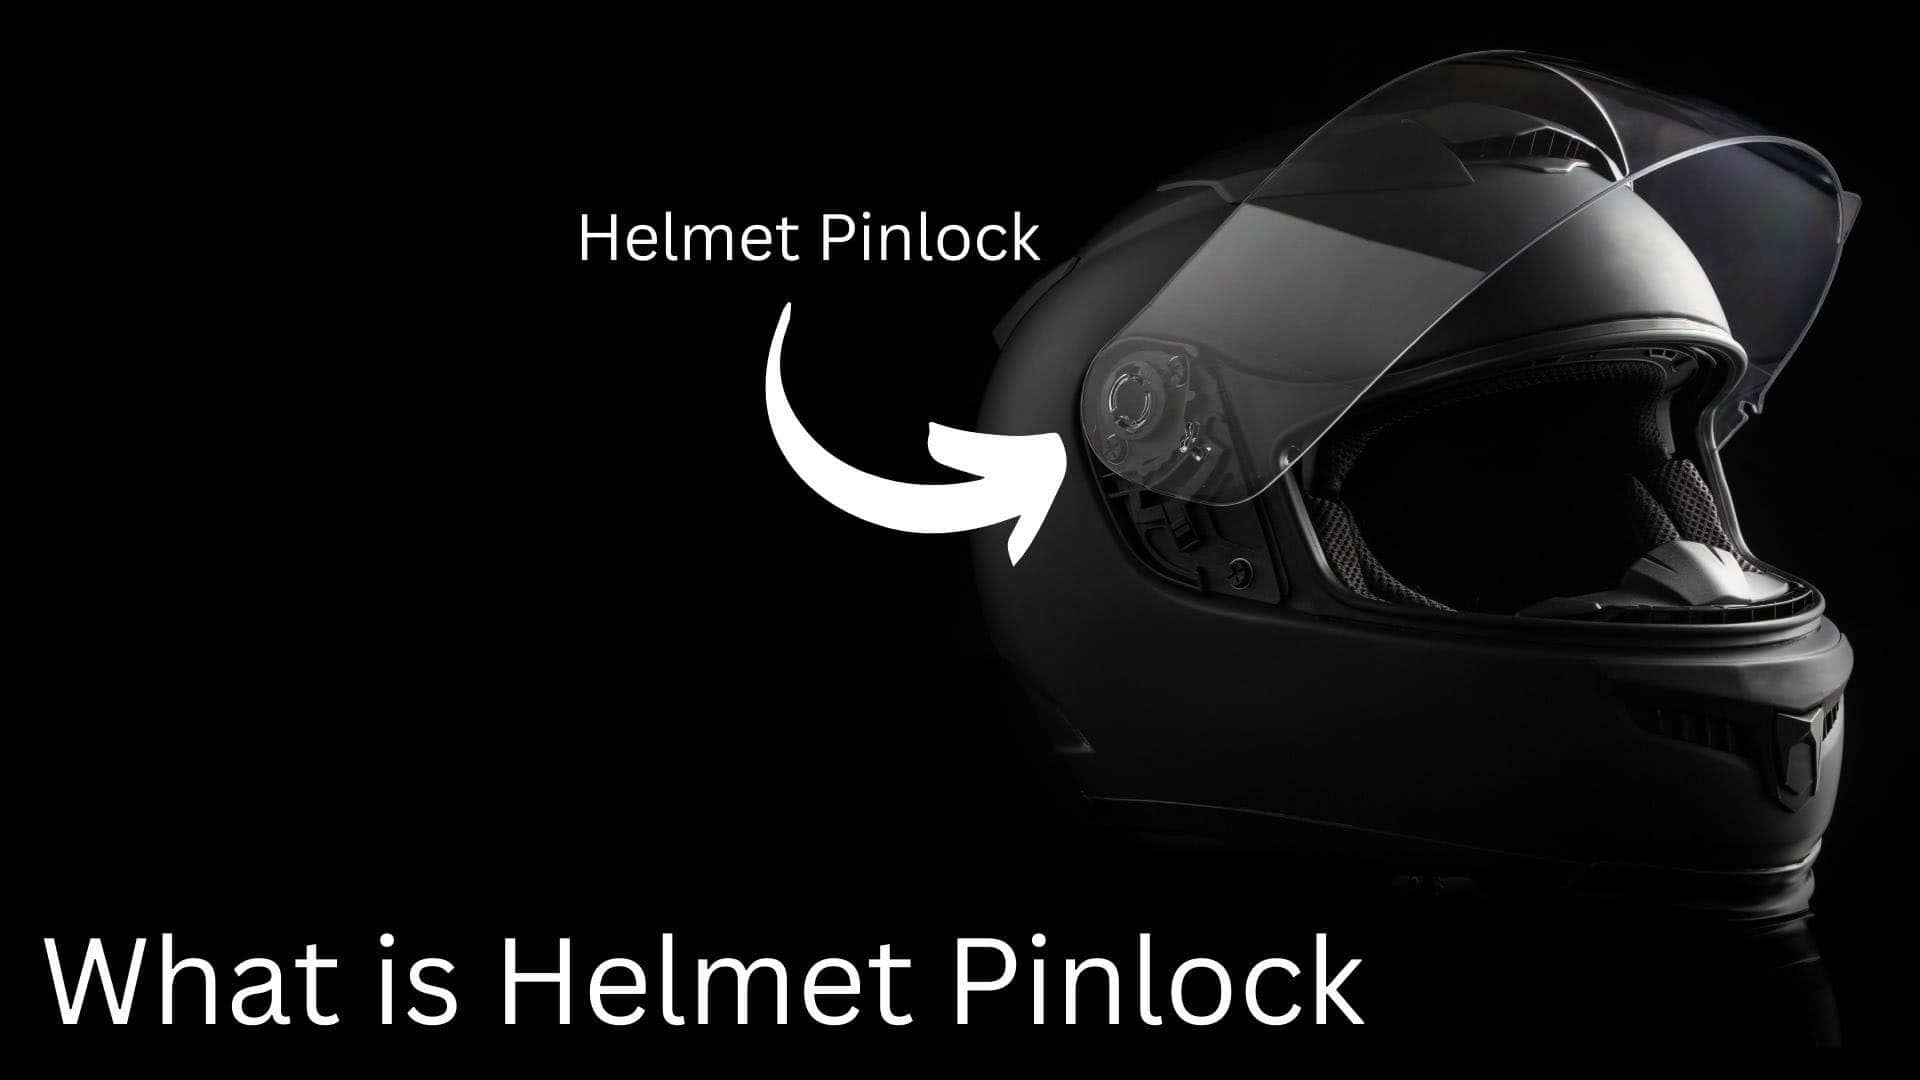 What Is a Helmet Pinlock, How Does It Work, And What Are Its Advantages?